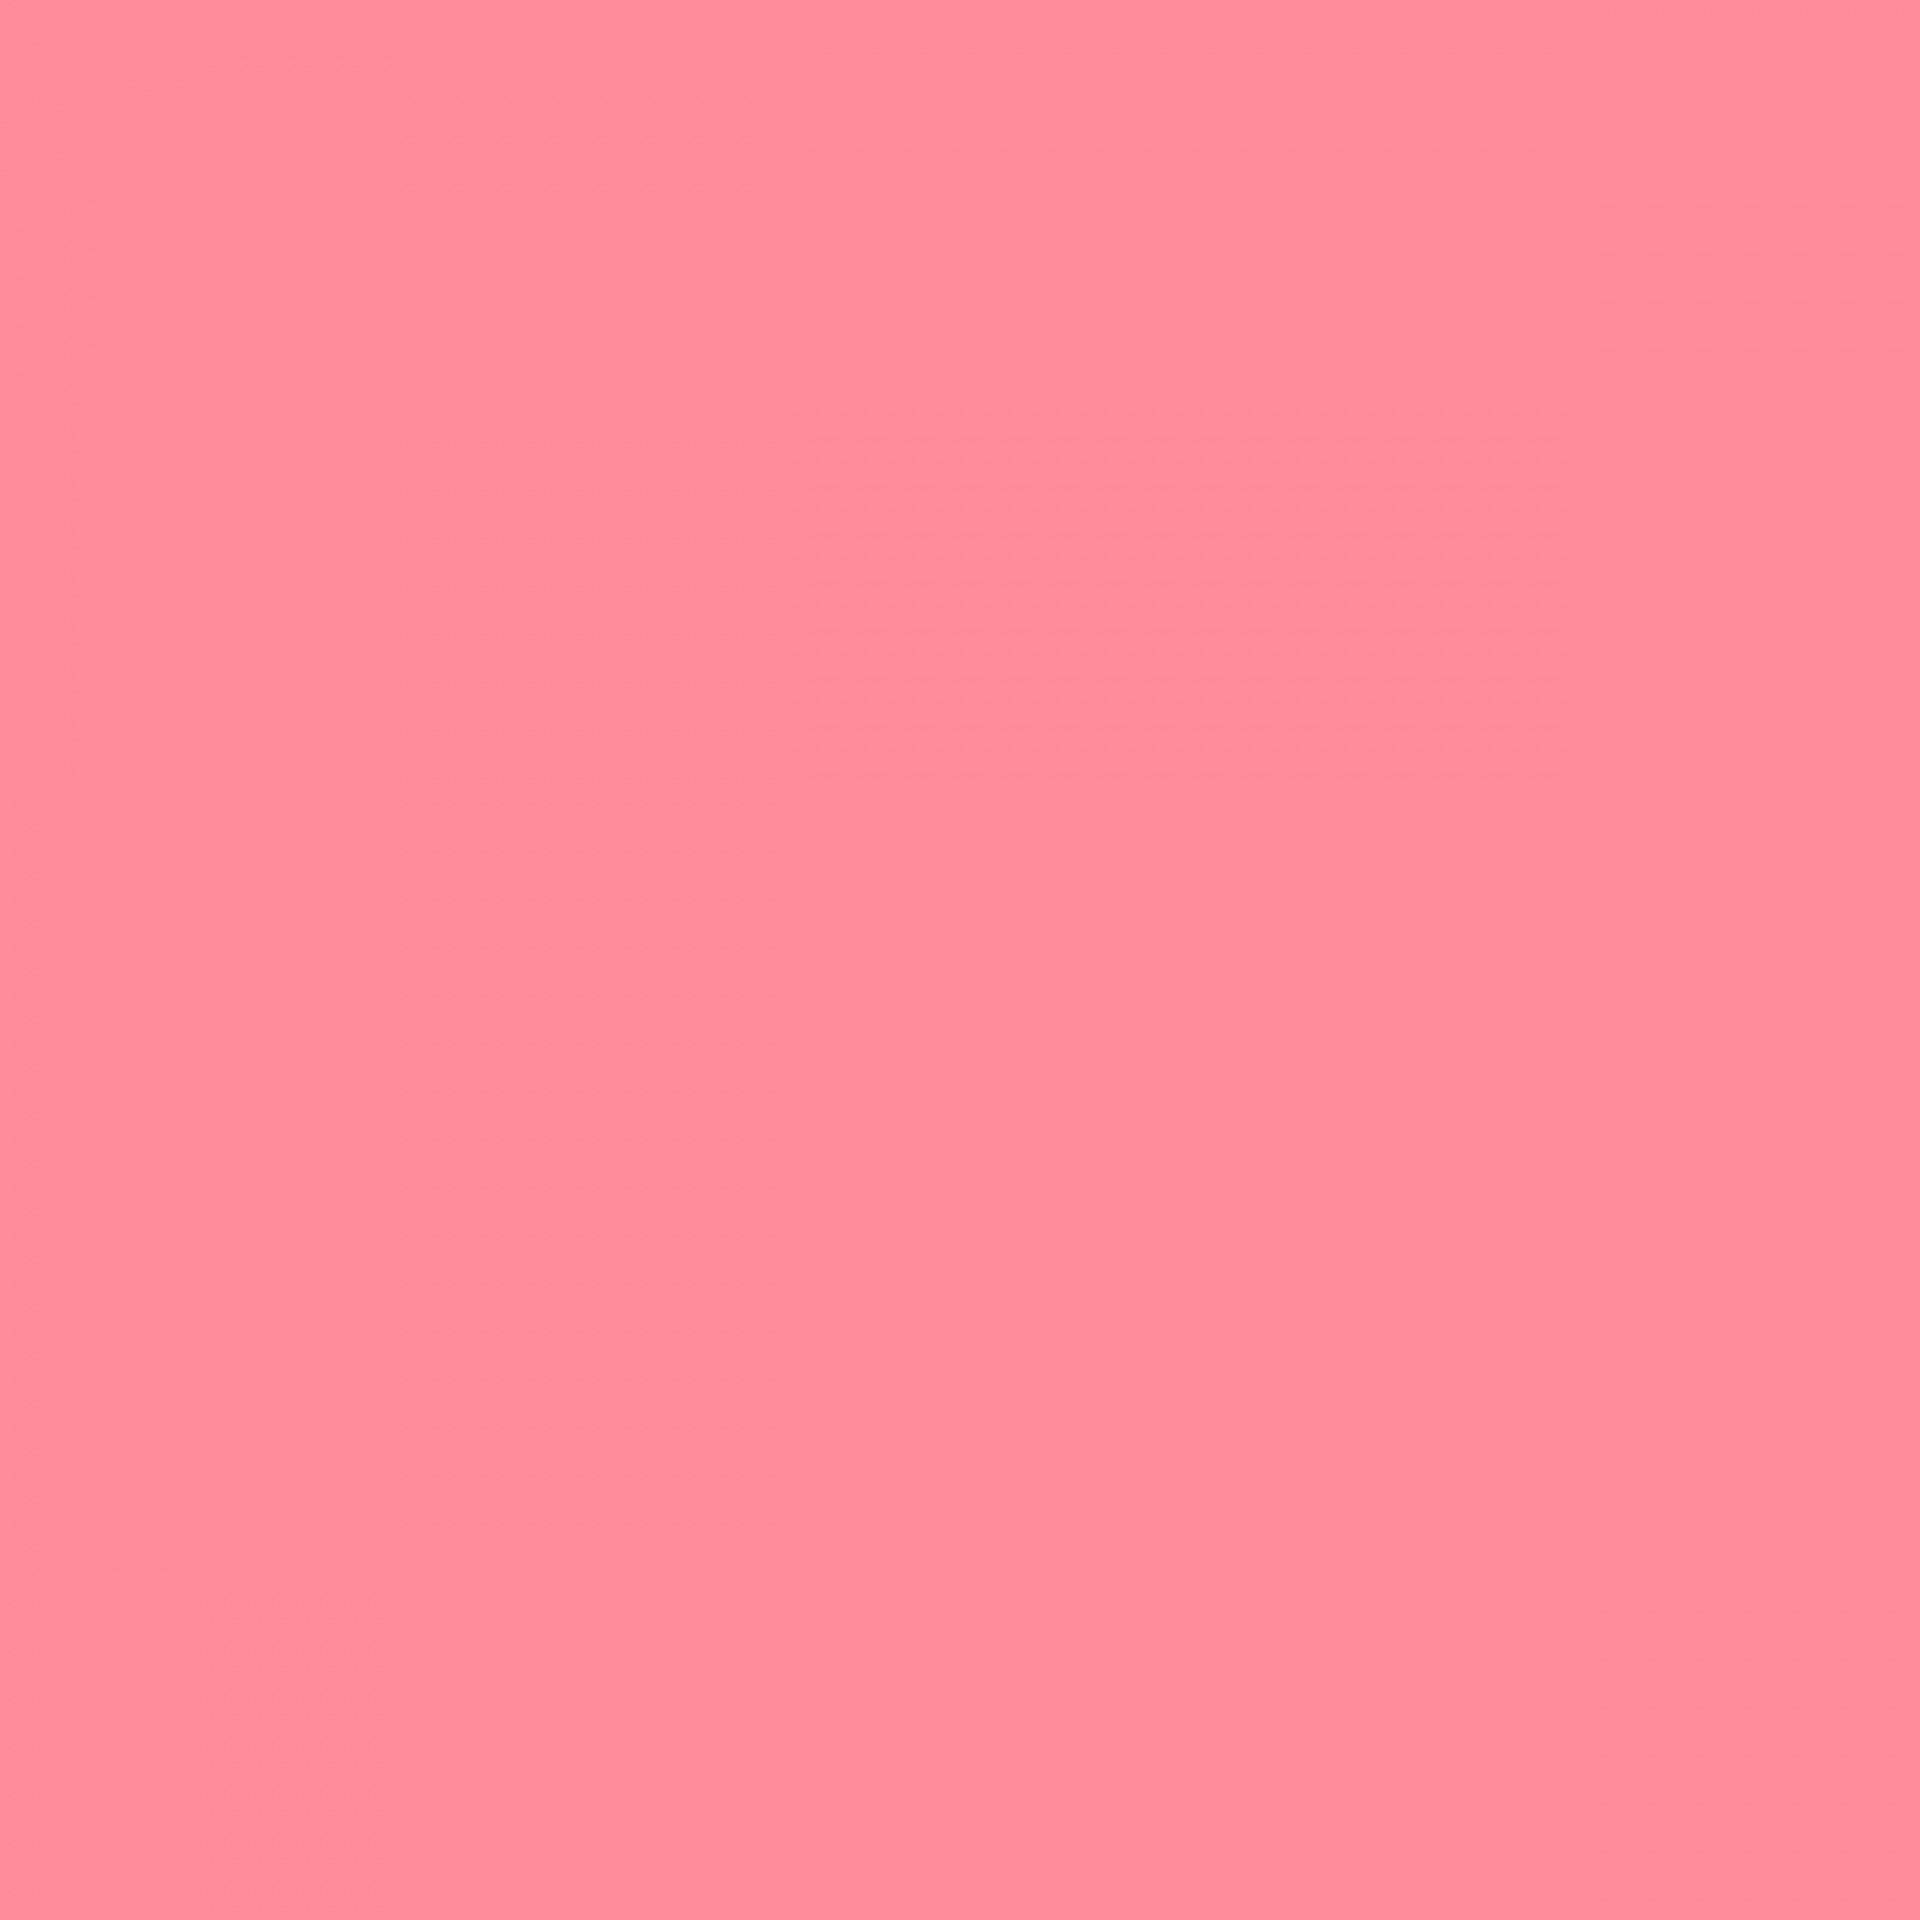 Coral Pink Glitter Background